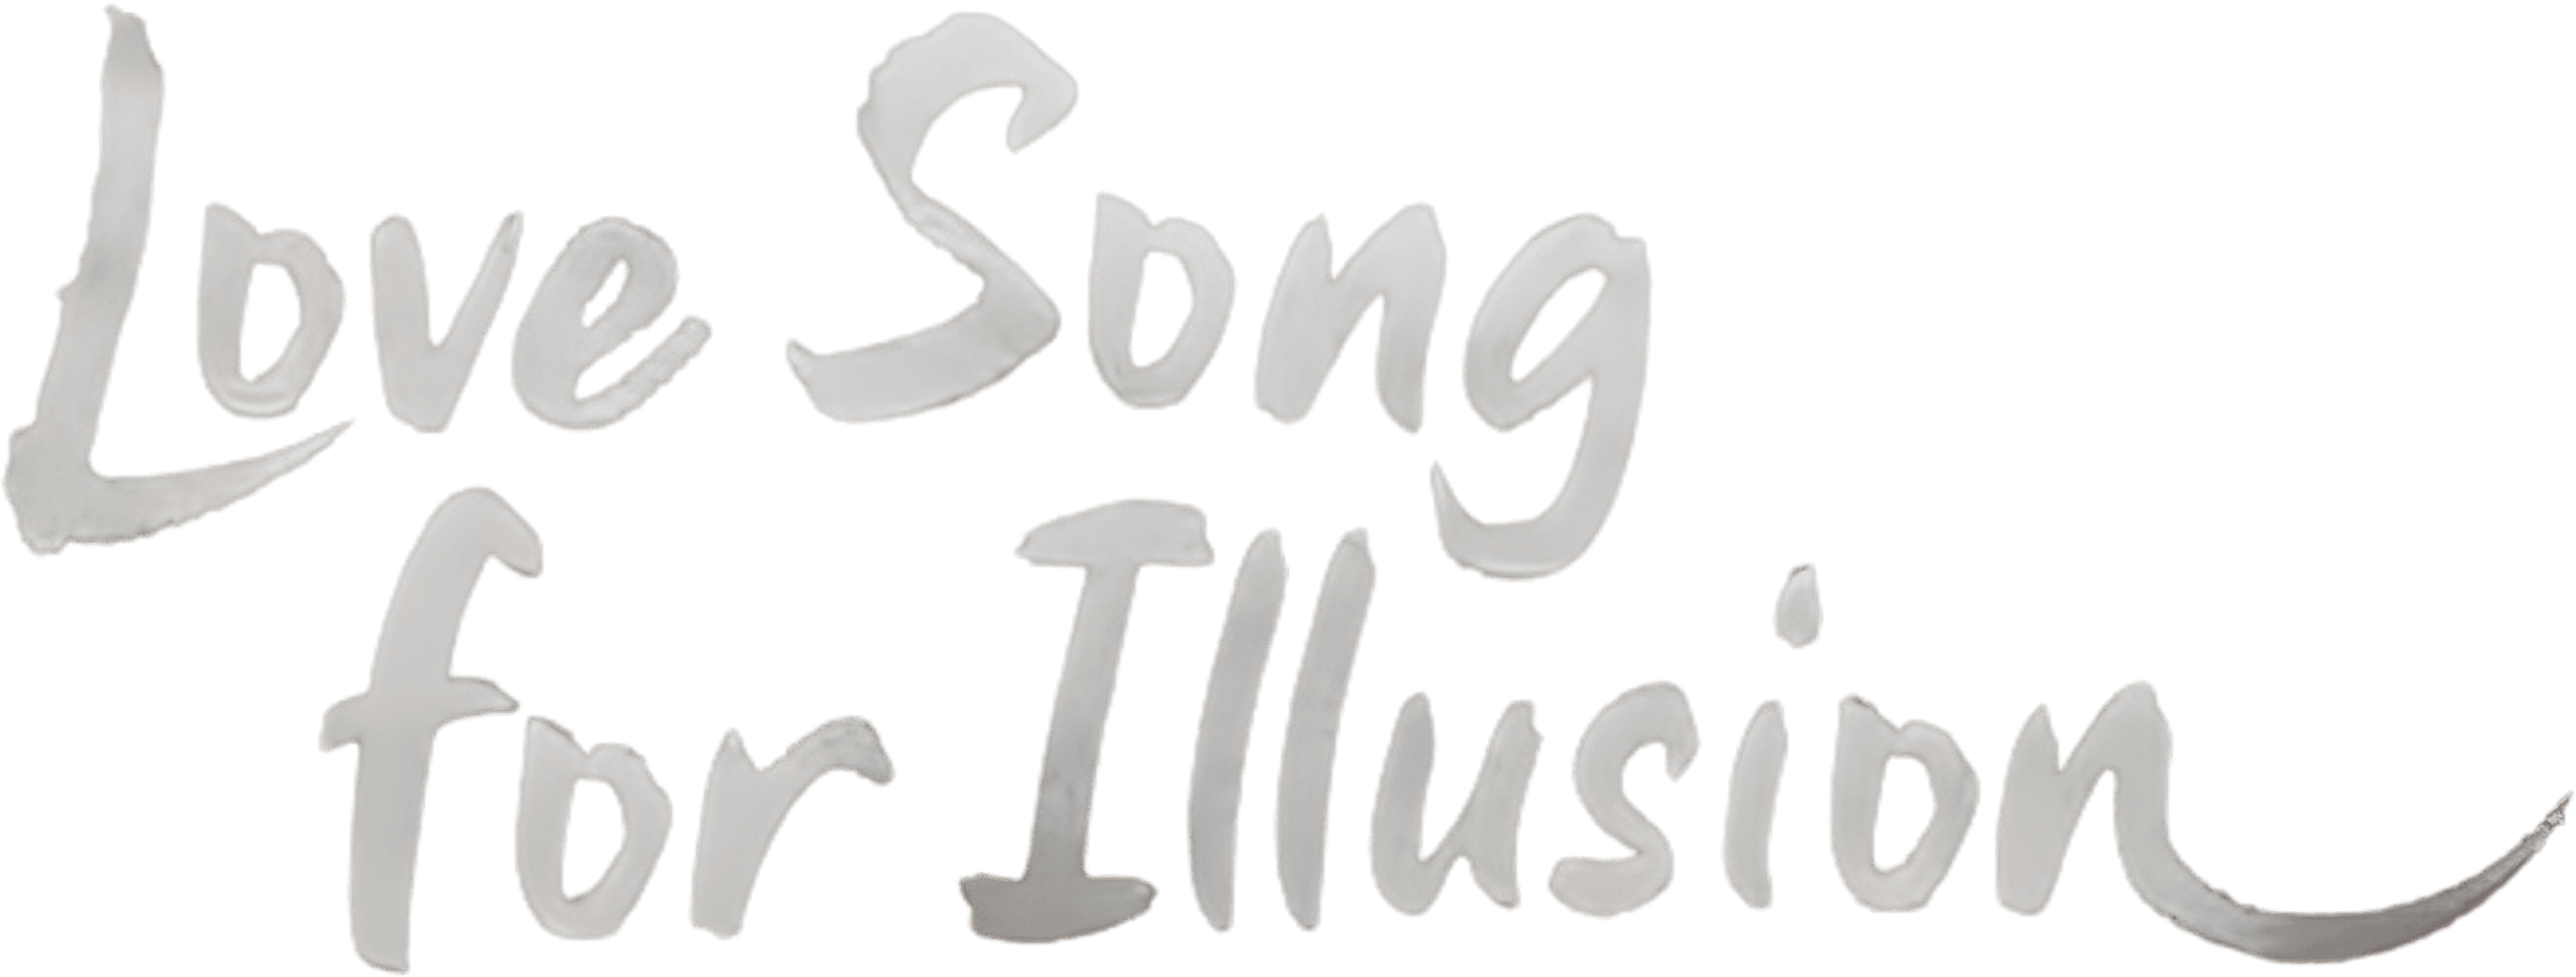 Love Song for Illusion logo